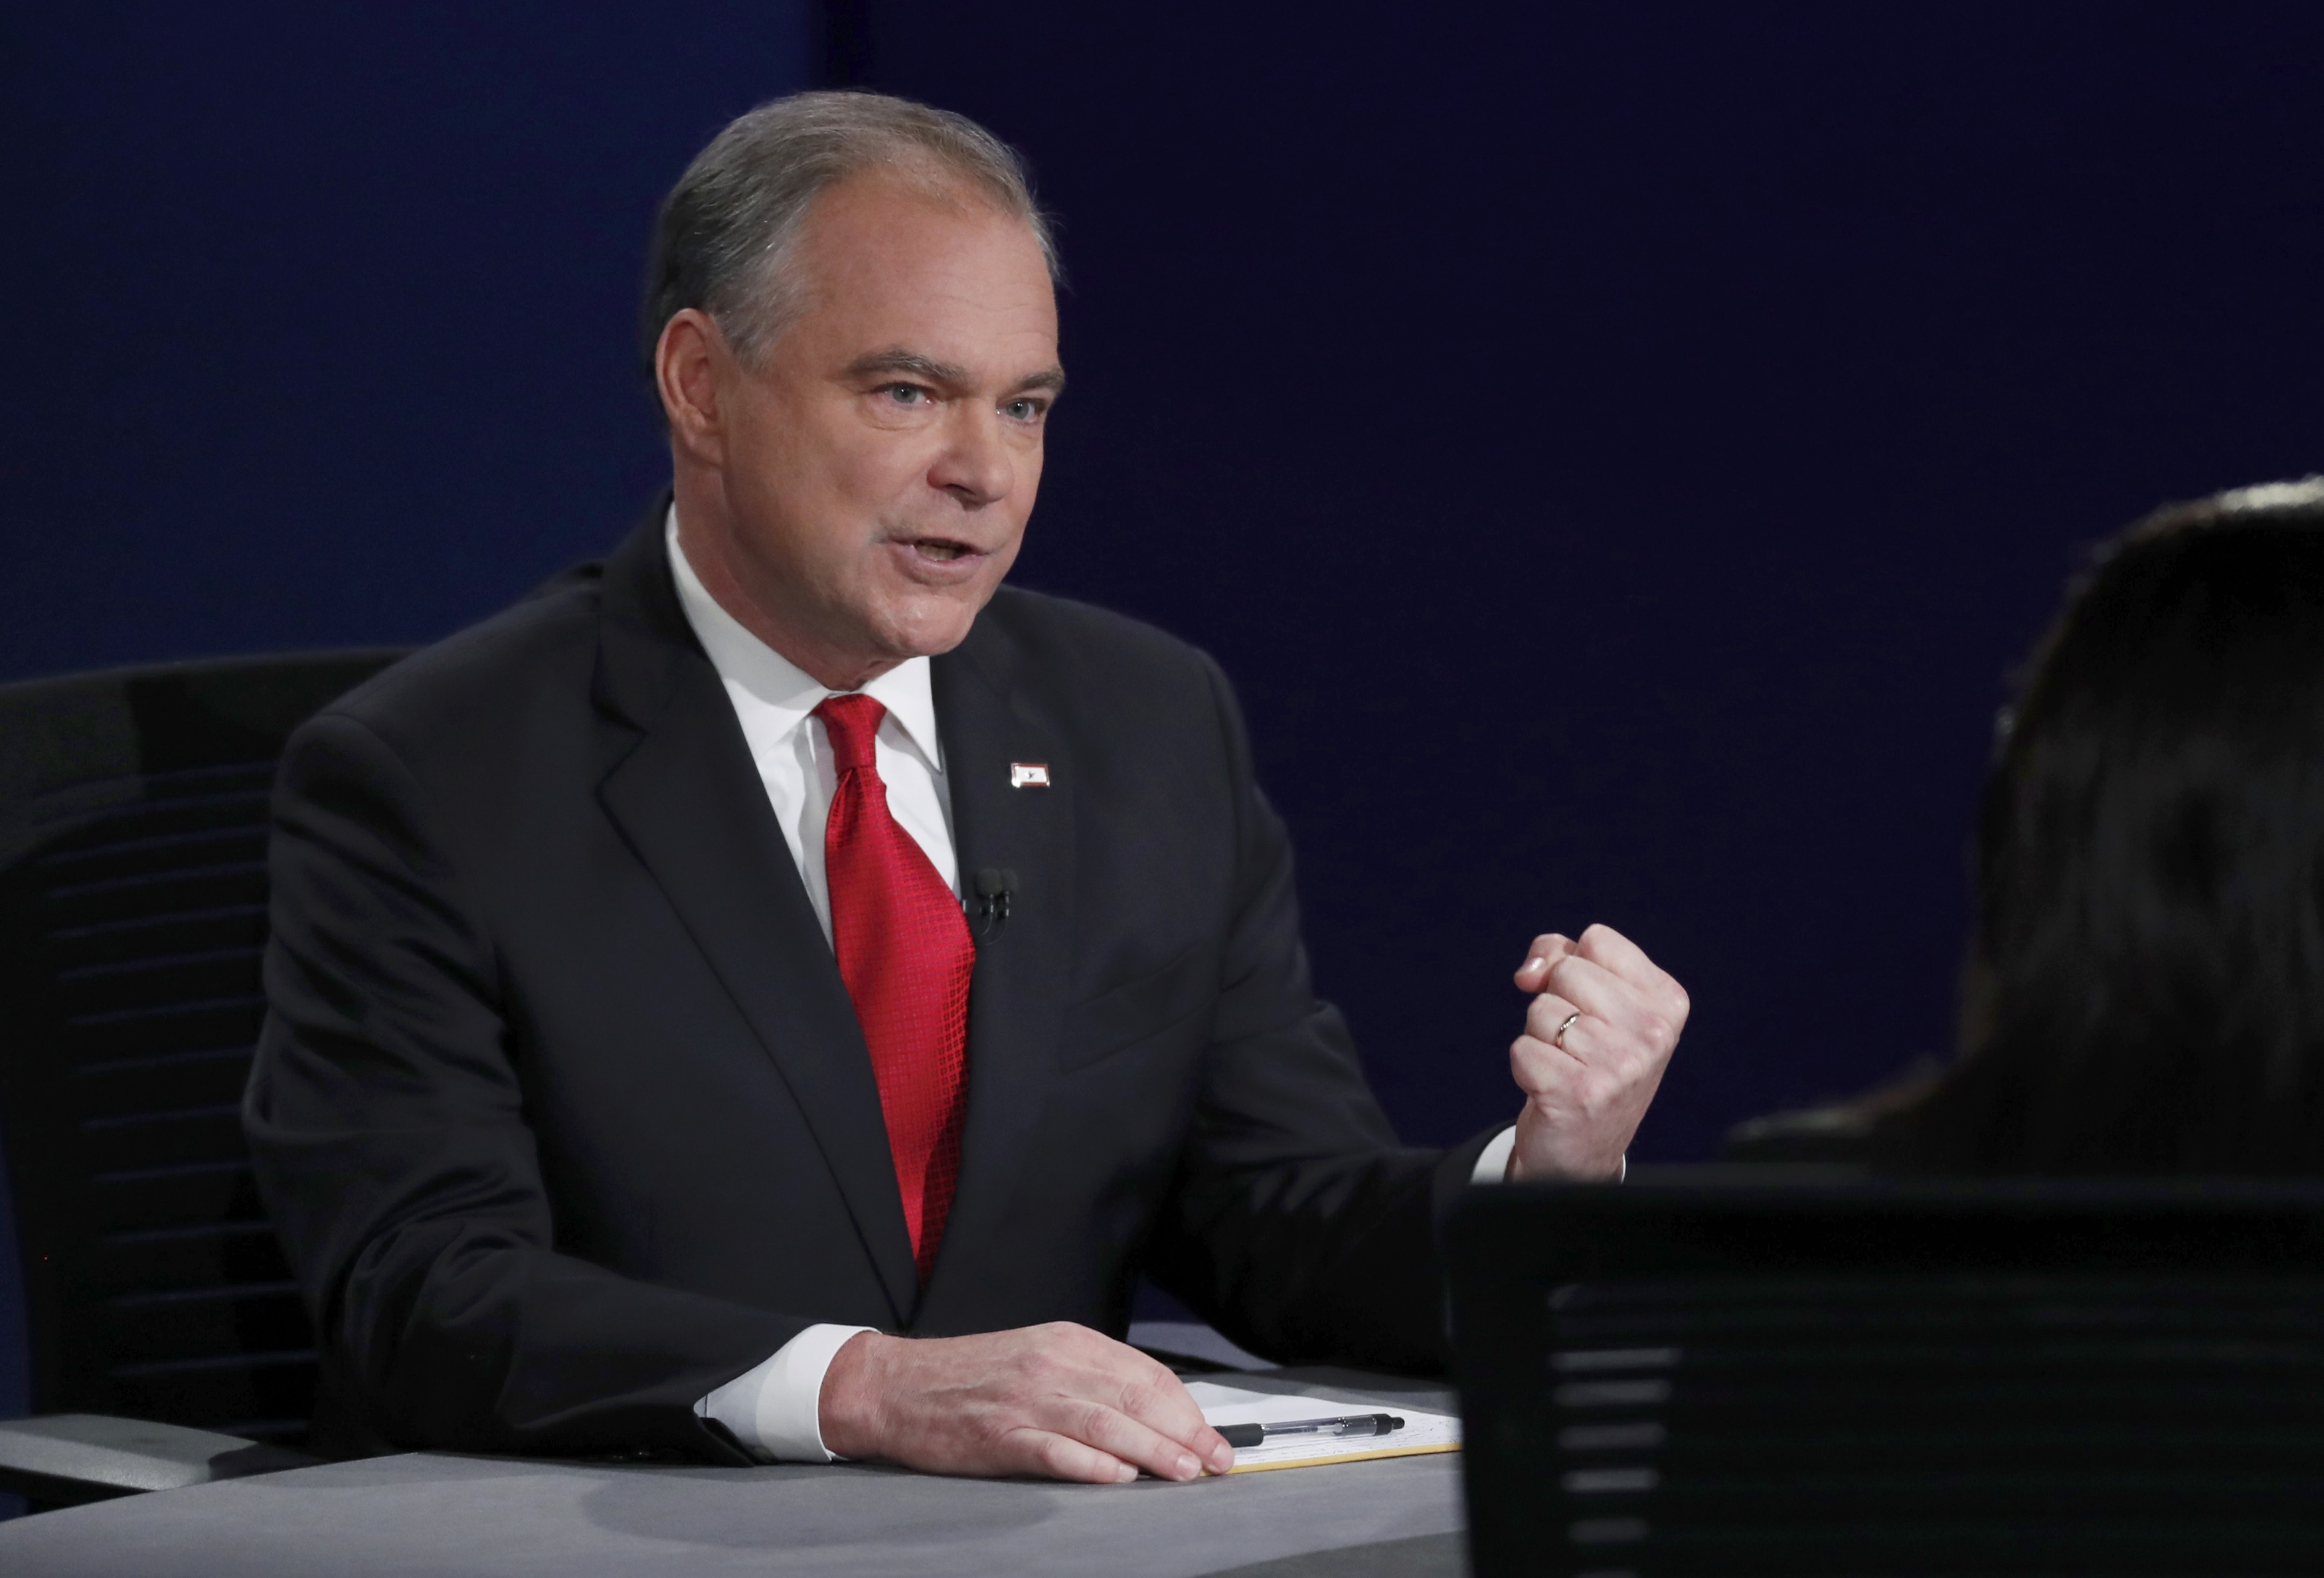 U.S. Sen. Tim Kaine of Virginia, the Democratic nominee for vice president,  speaks during his Oct. 4  vice presidential debate against Indiana Gov. Mike Pence, the Republican nominee, at Longwood University in Farmville, Va. (CNS photo/Chris Keane, Reuters)